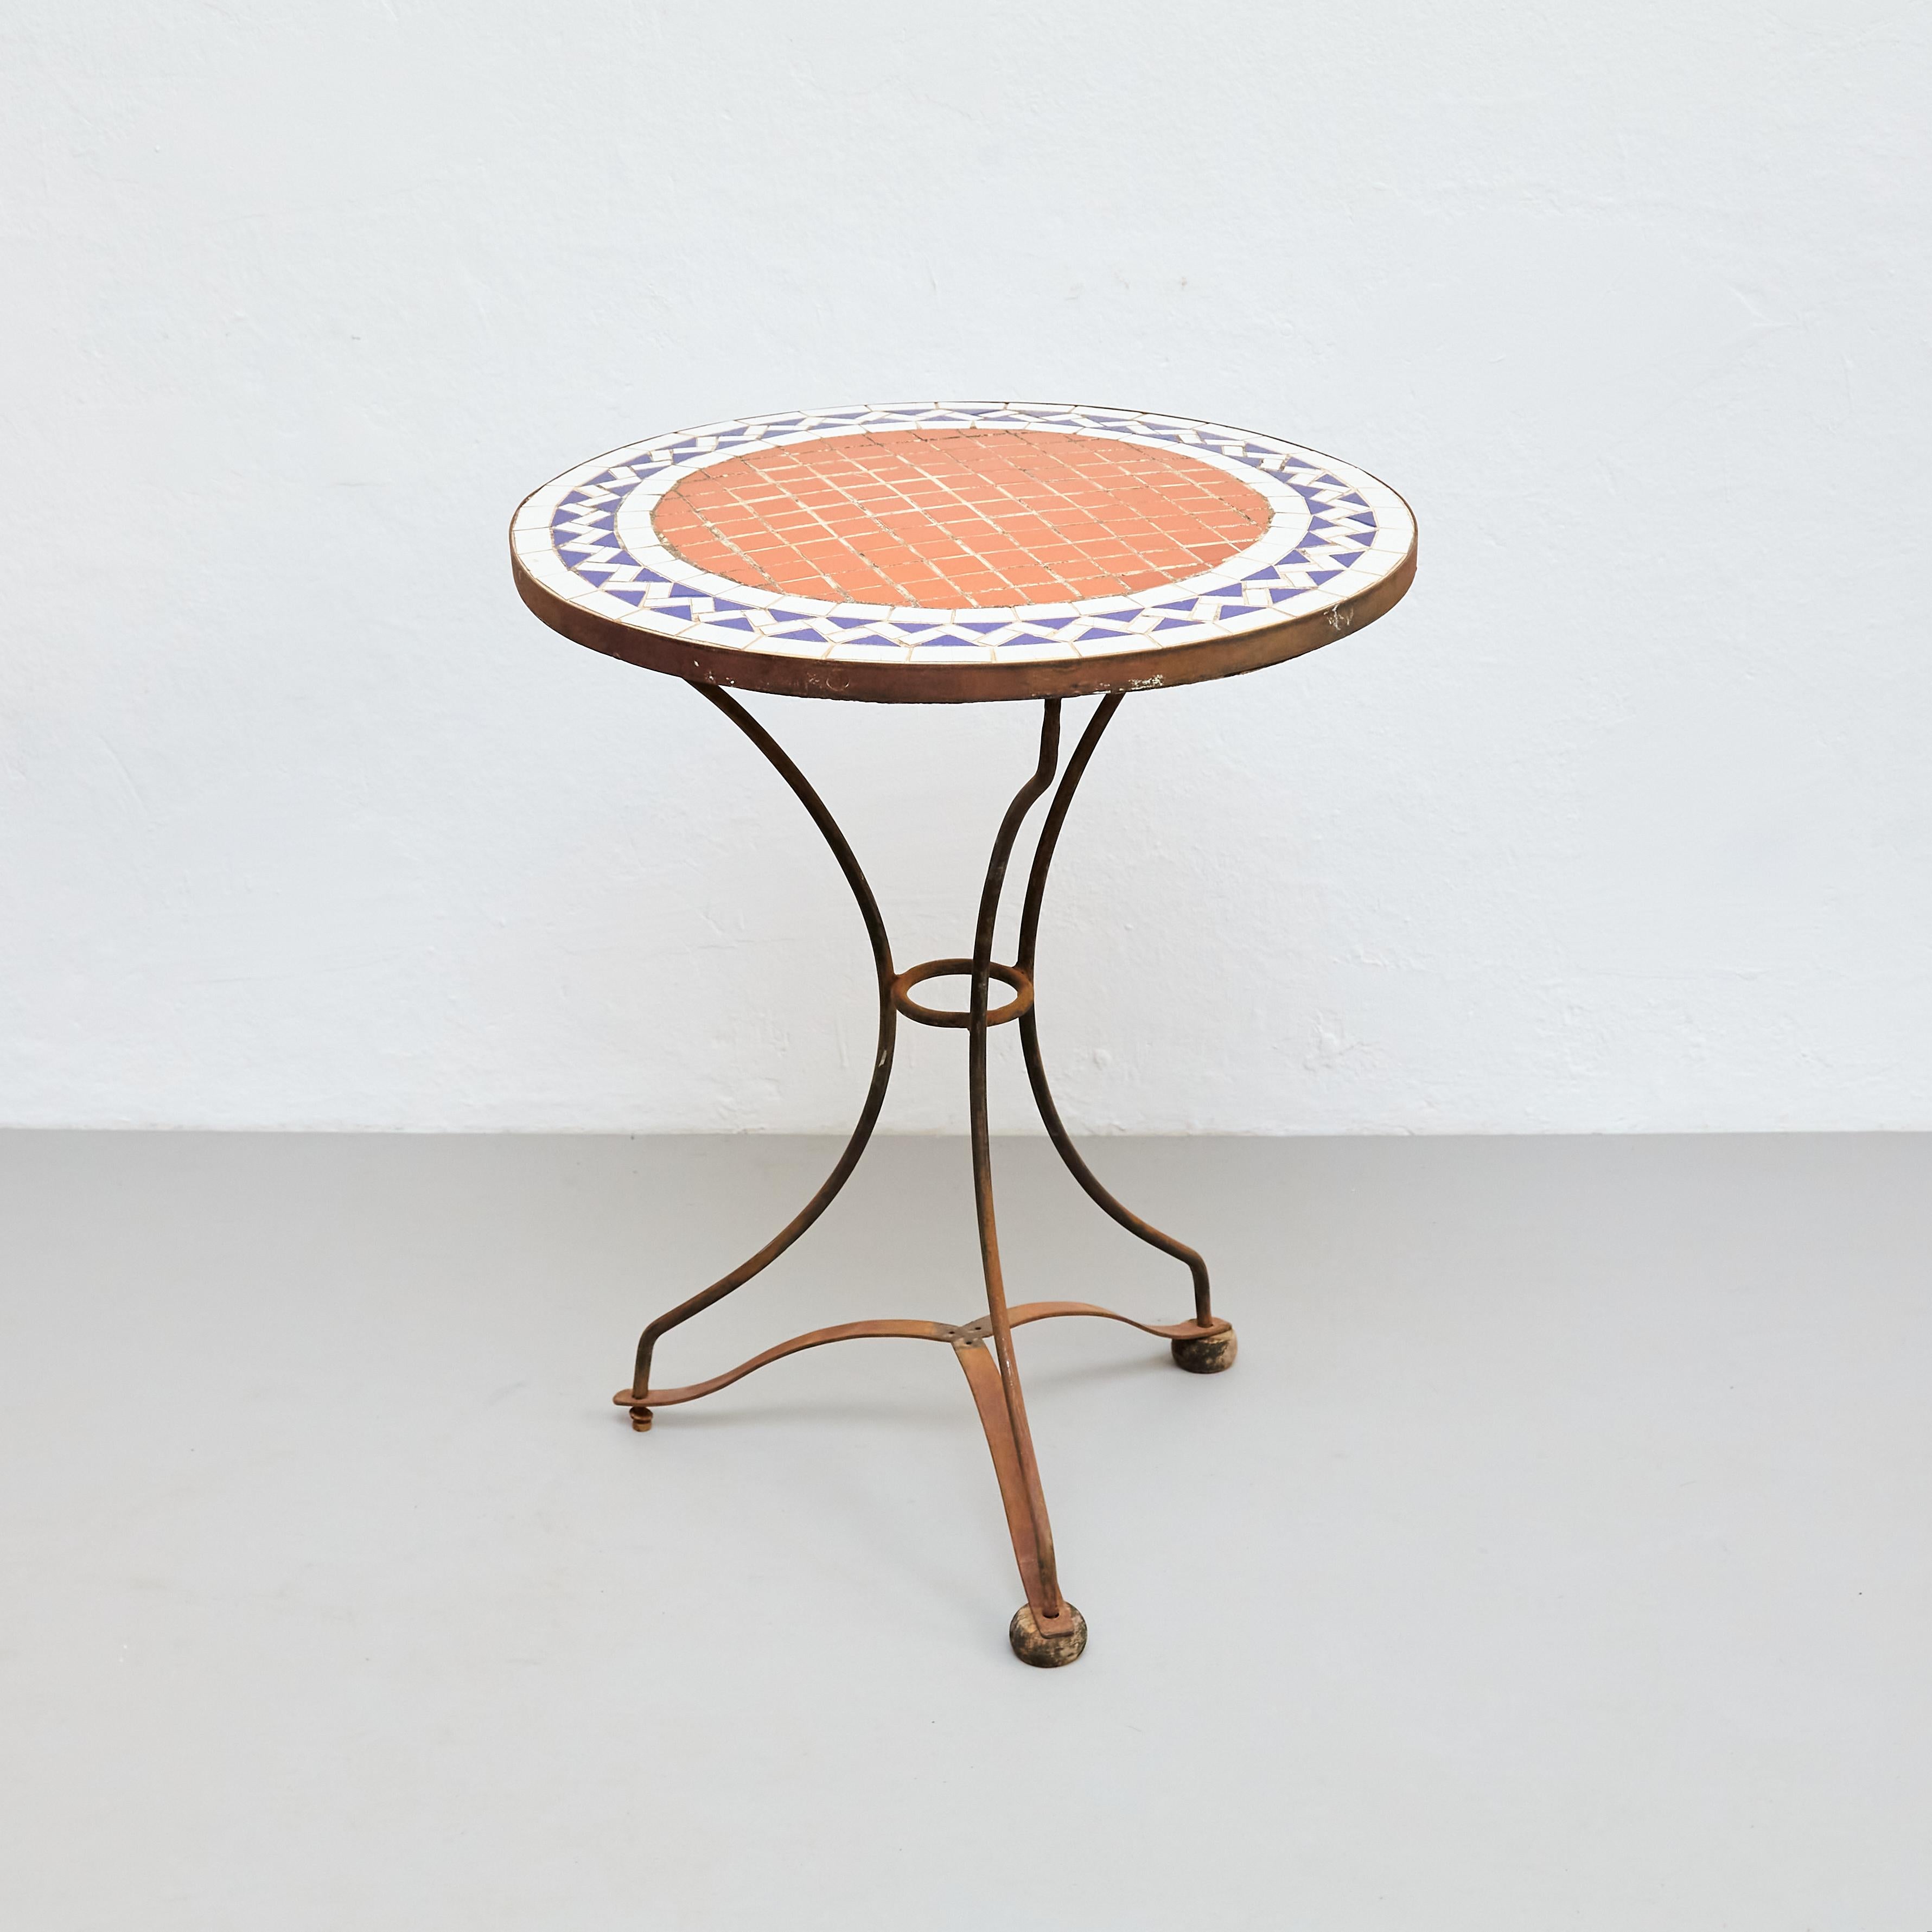 This Mid-Century Modern Mosaic Bistrot French Coffee Table is a stunning piece of furniture, exuding elegance and sophistication. Manufactured in France circa 1960, this table boasts a unique and eye-catching mosaic design that is sure to draw the